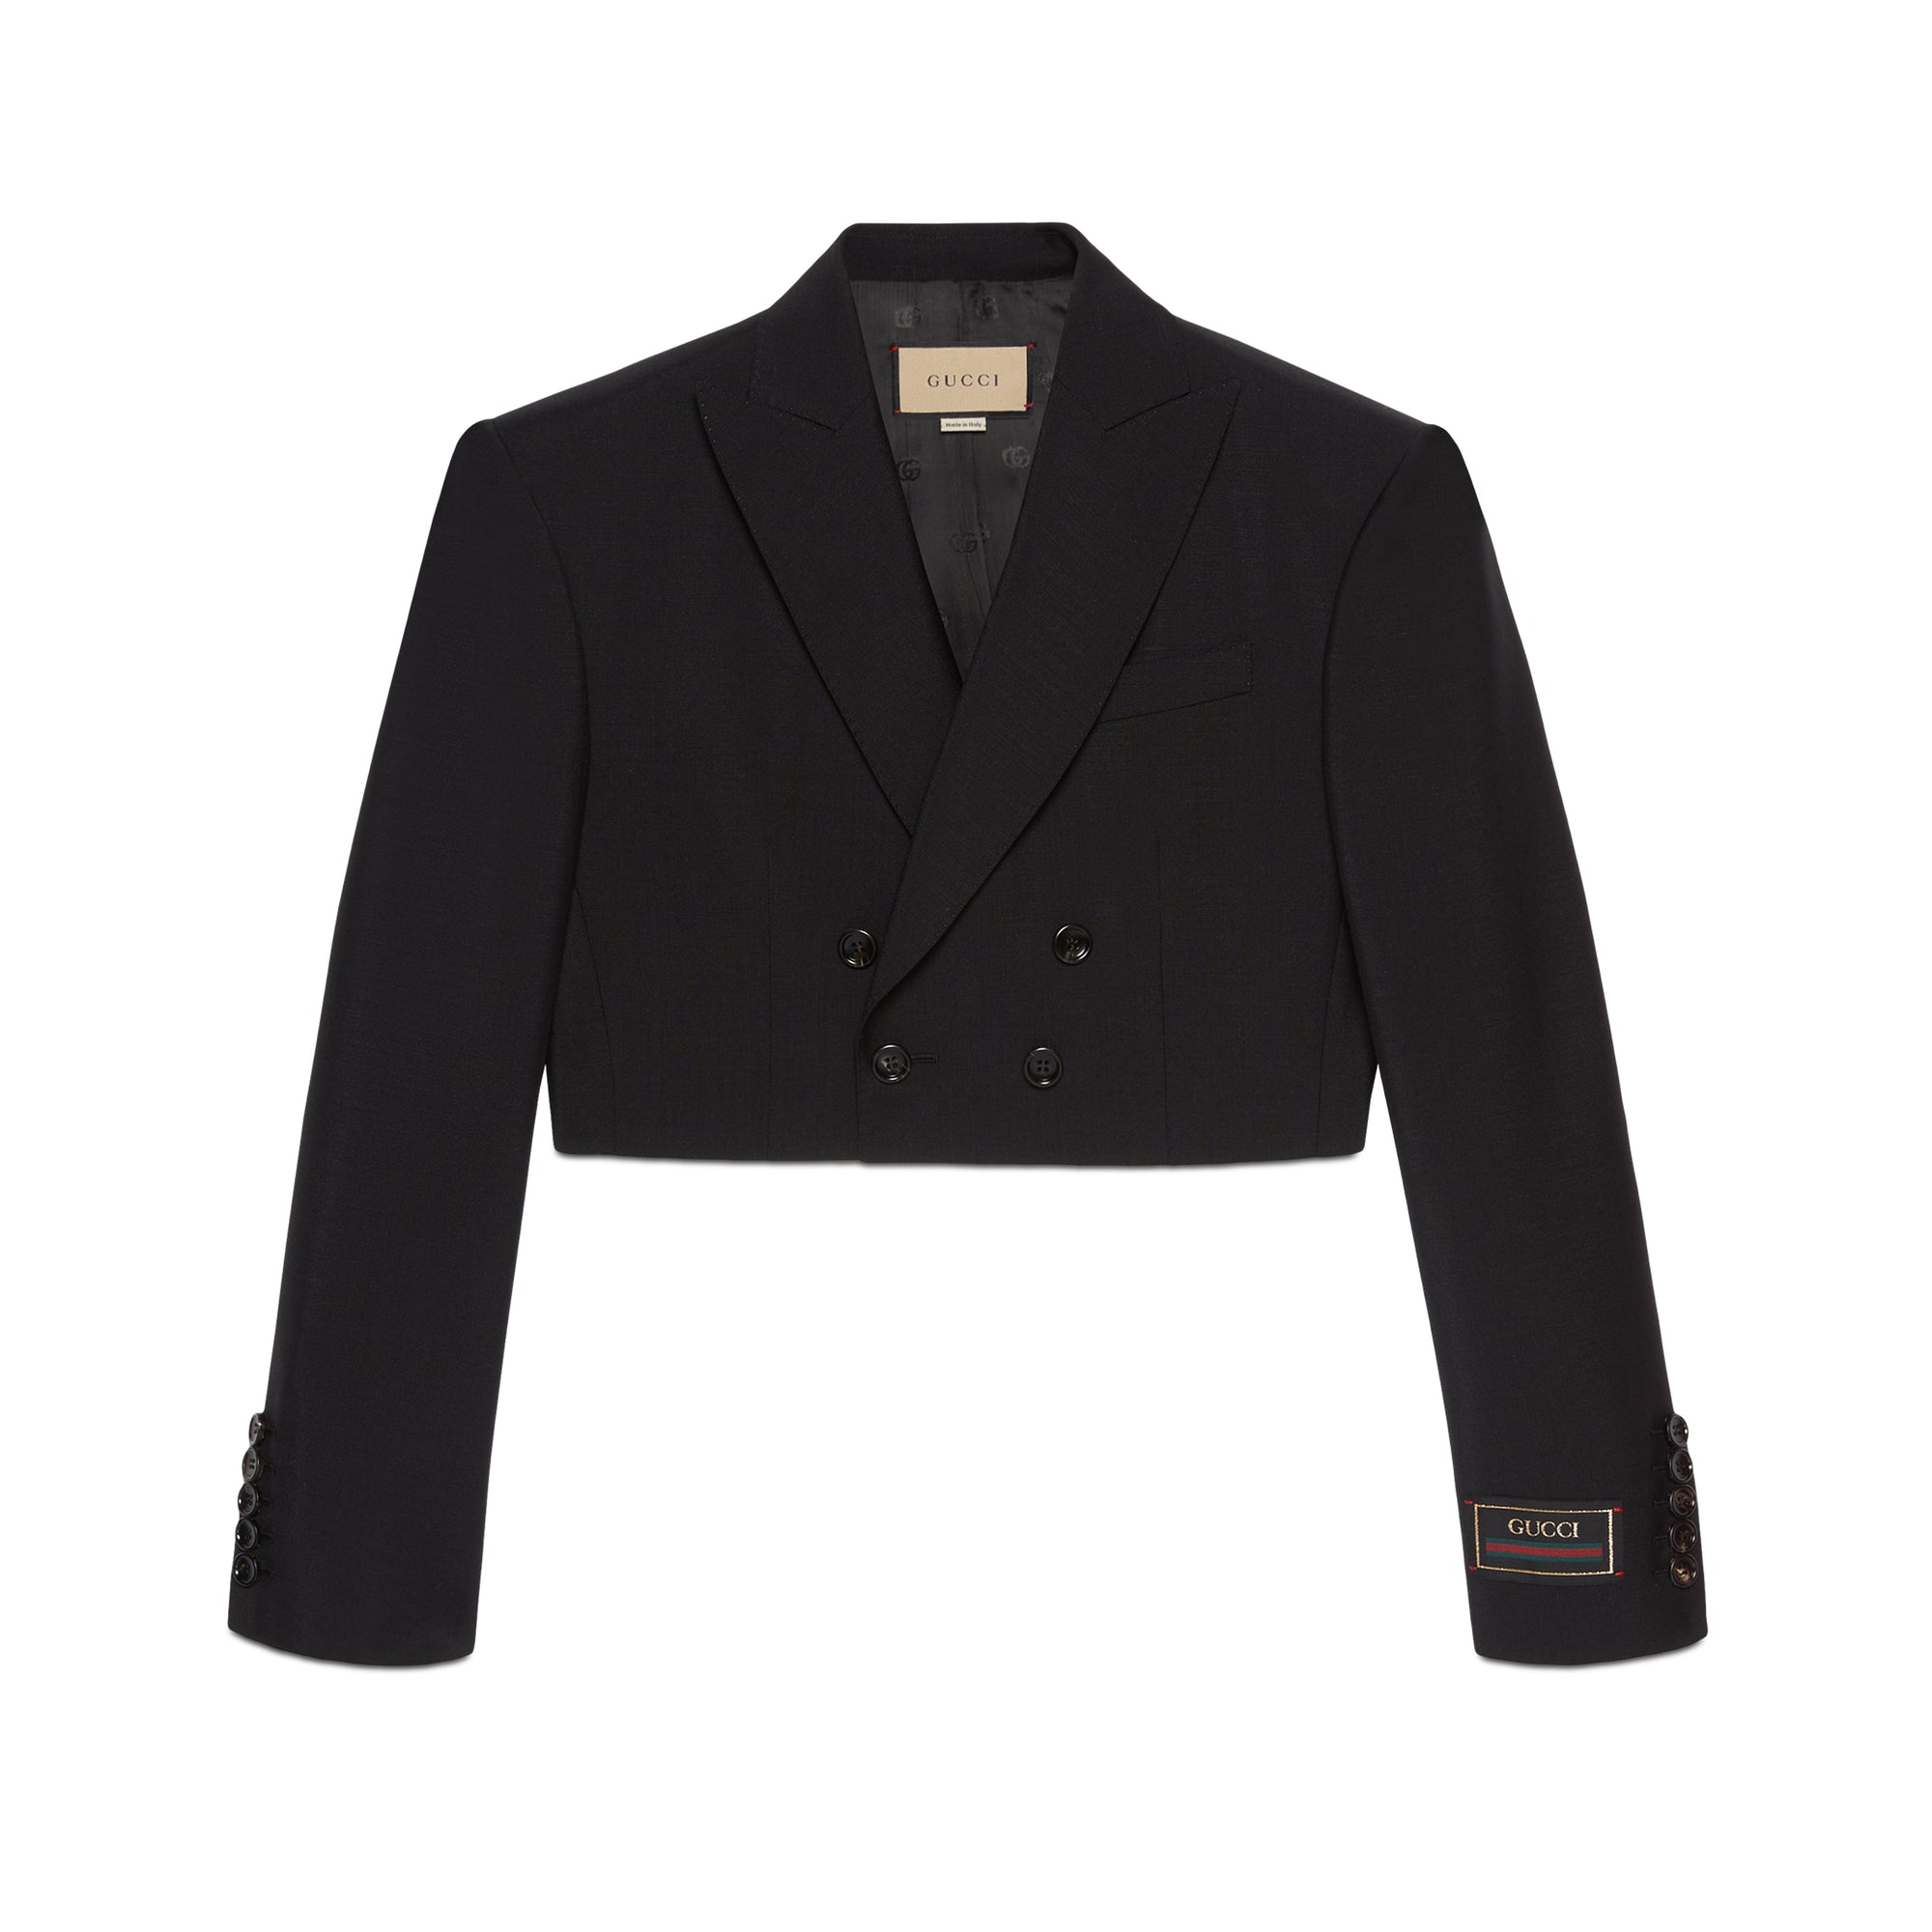 Gucci - Women’s Mohair Cropped Jackets - (Black) view 1